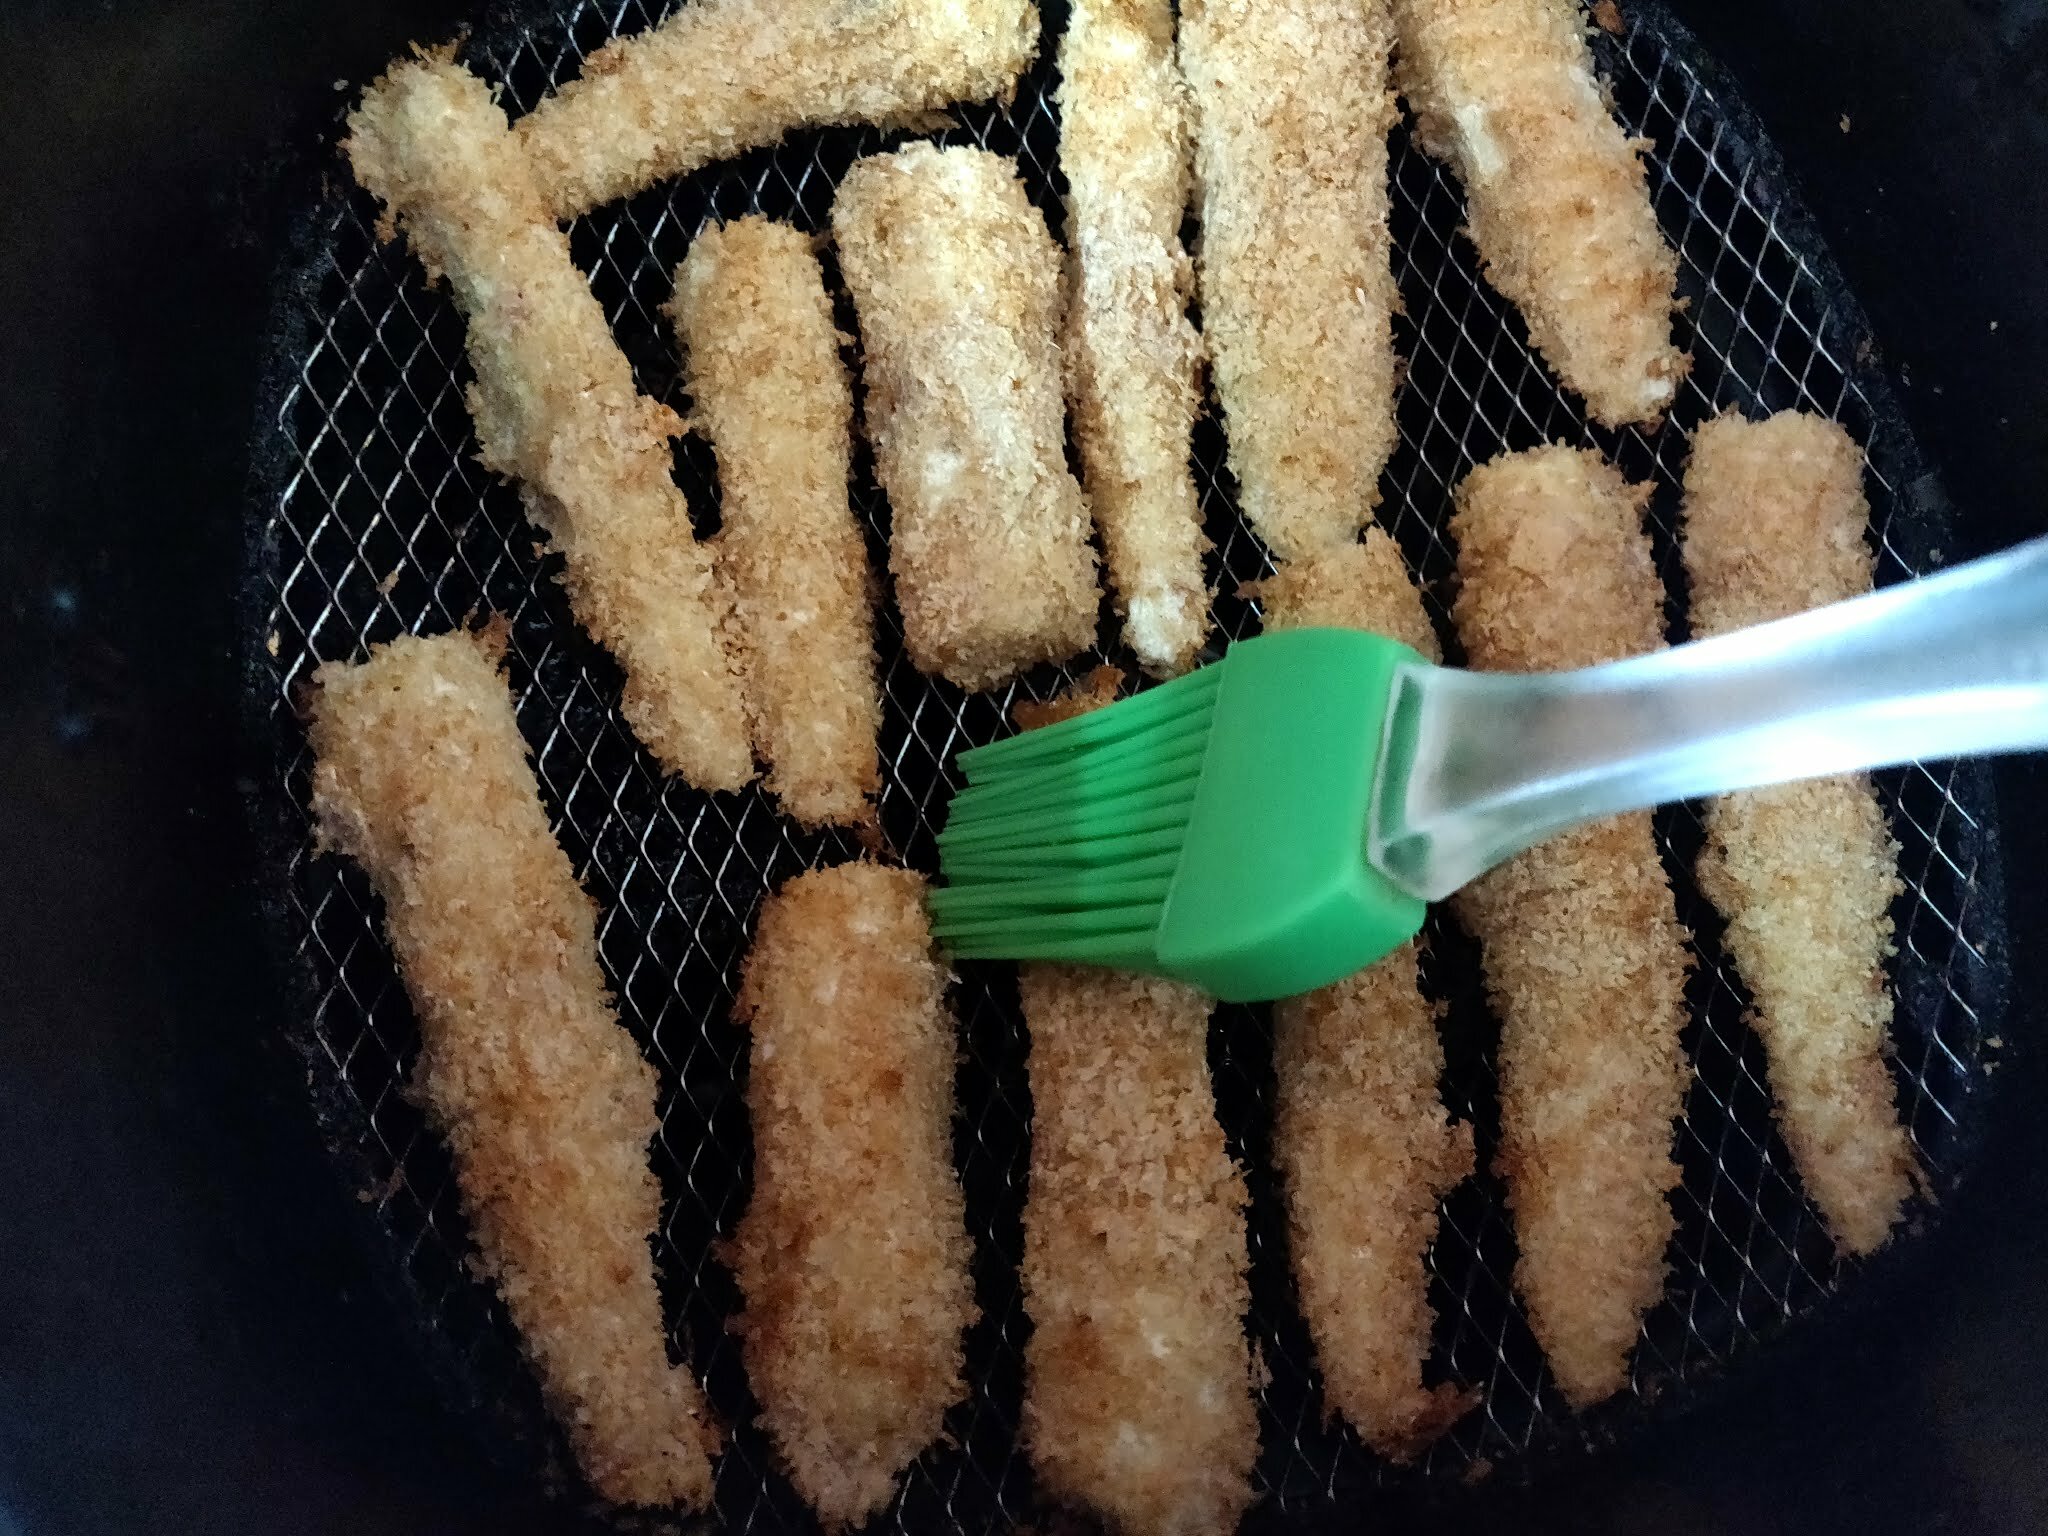 Brushing oil on air fried baby corns.